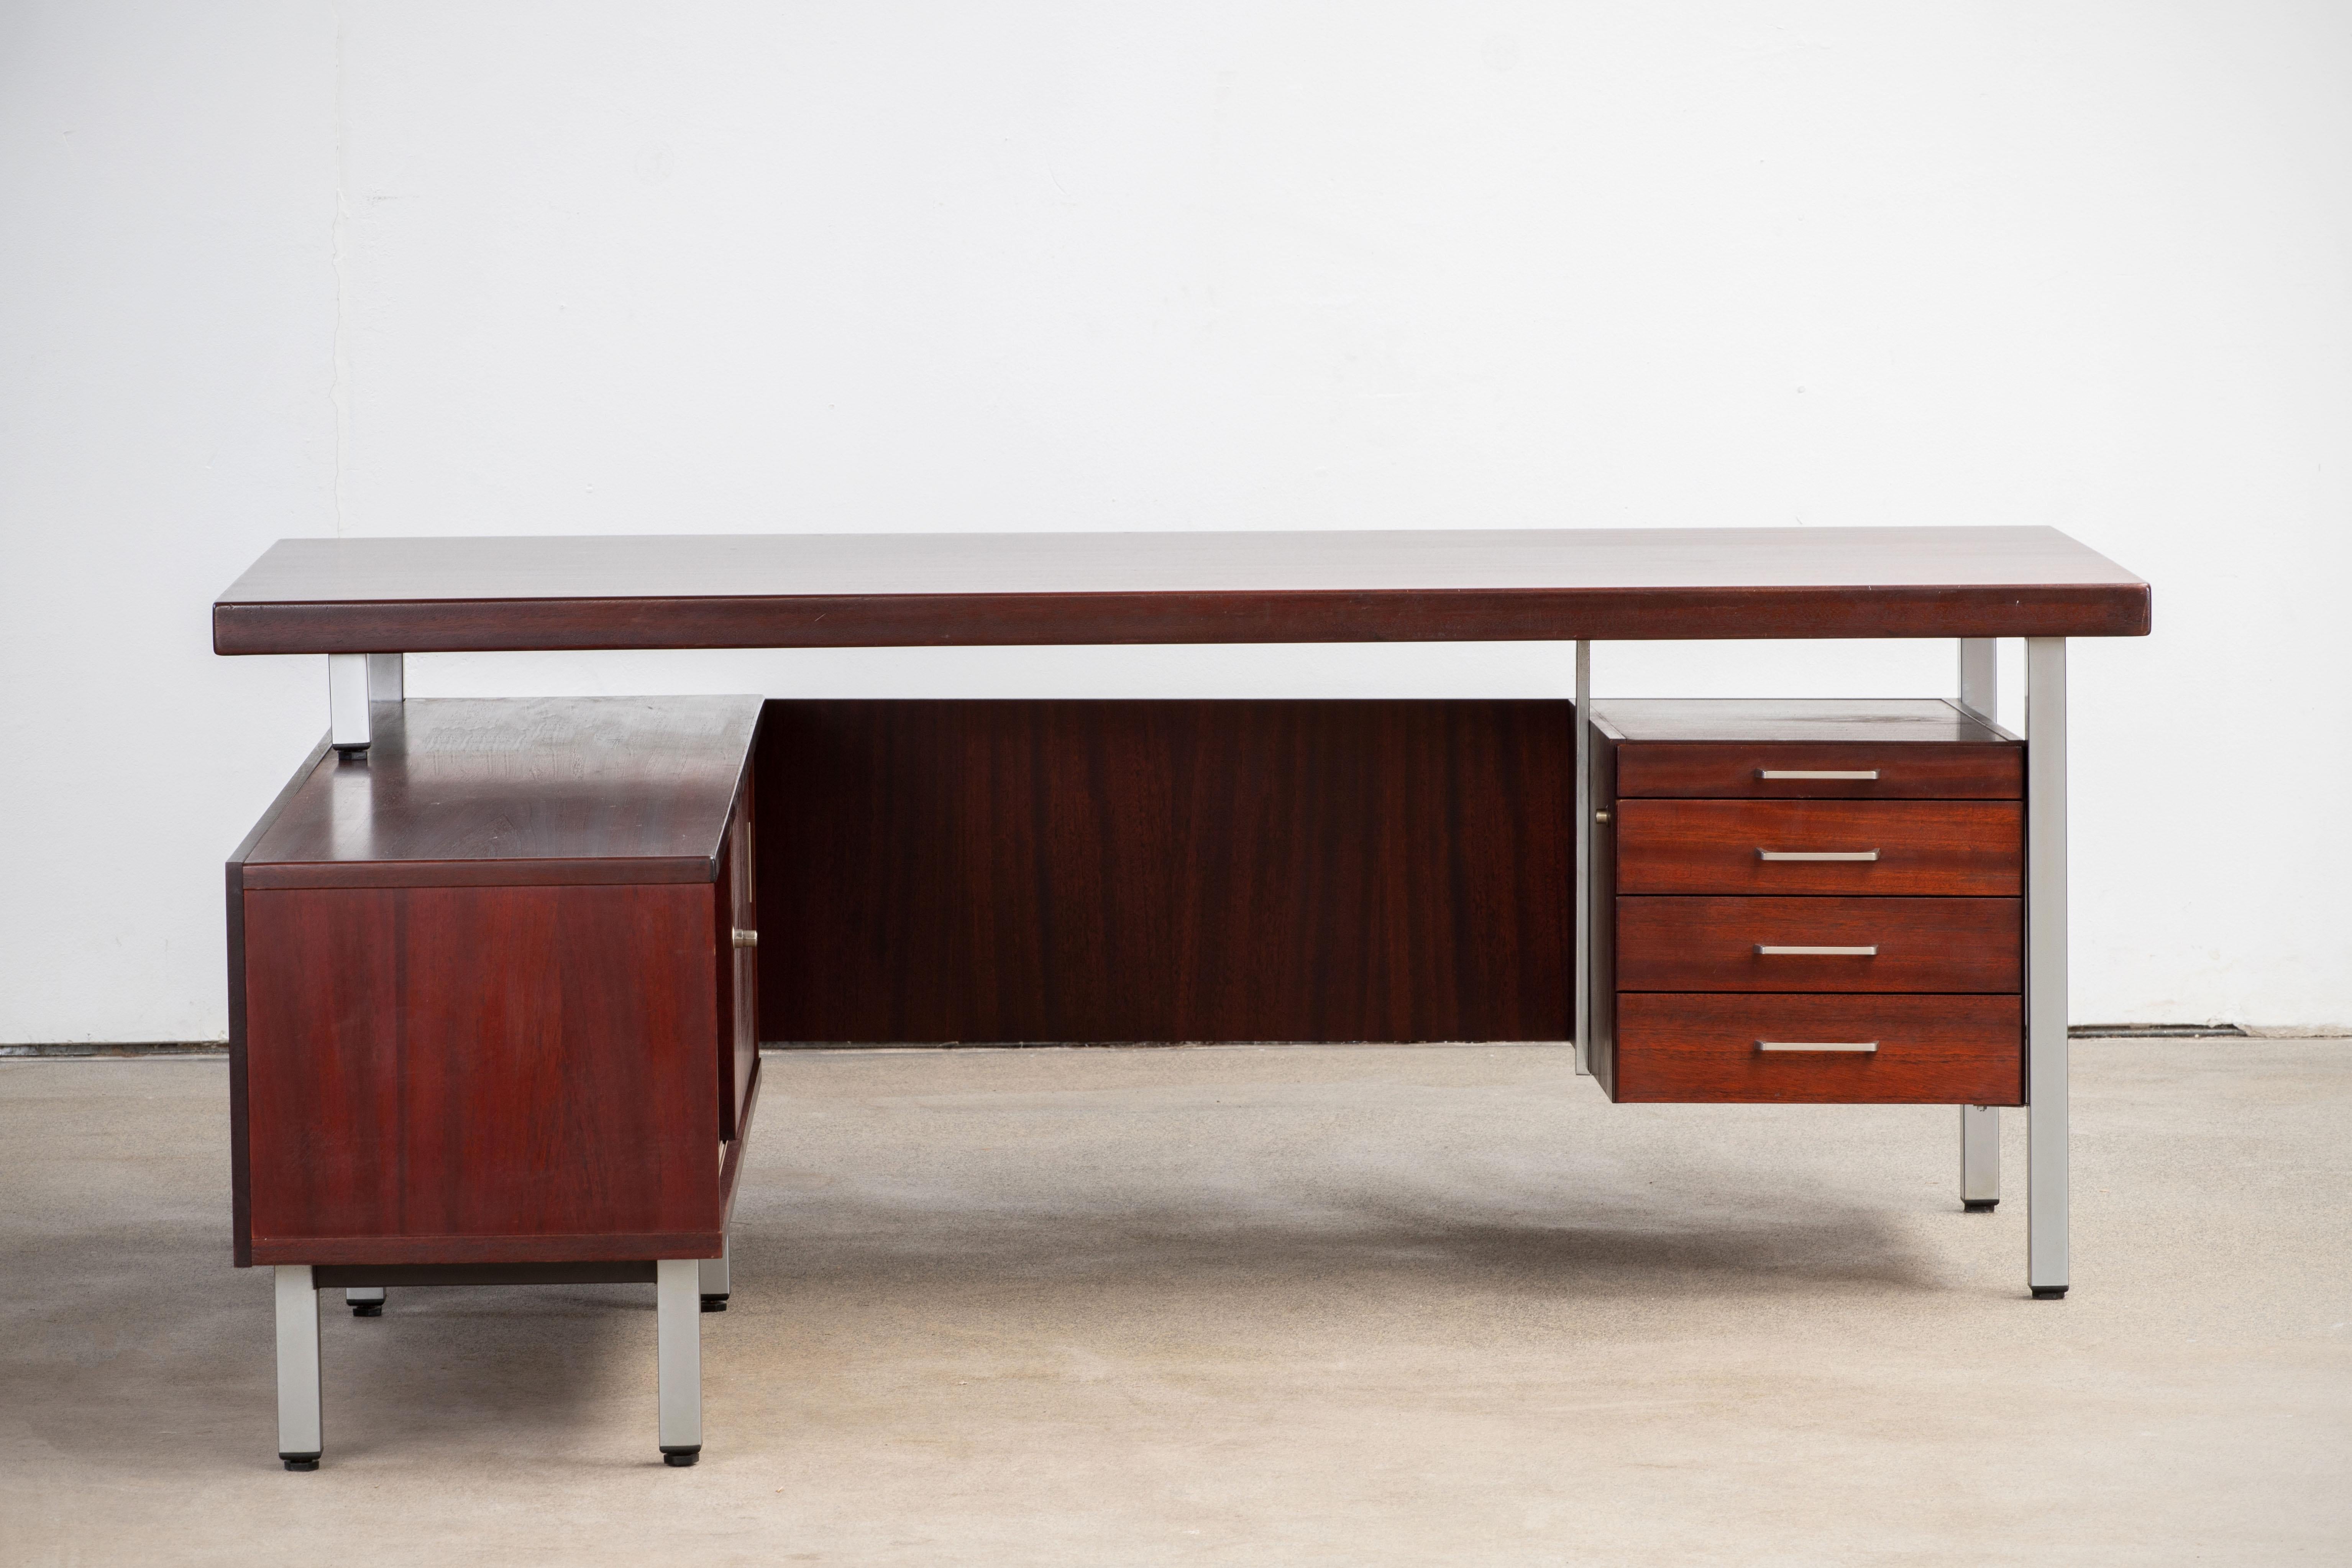 Beautifully designed writing desk in teak. With a very distinct design this desks every wood surface has been given specific angles such as the tabletop, the unit with drawers as well as the legs. The desk is given a very light and airy impression.